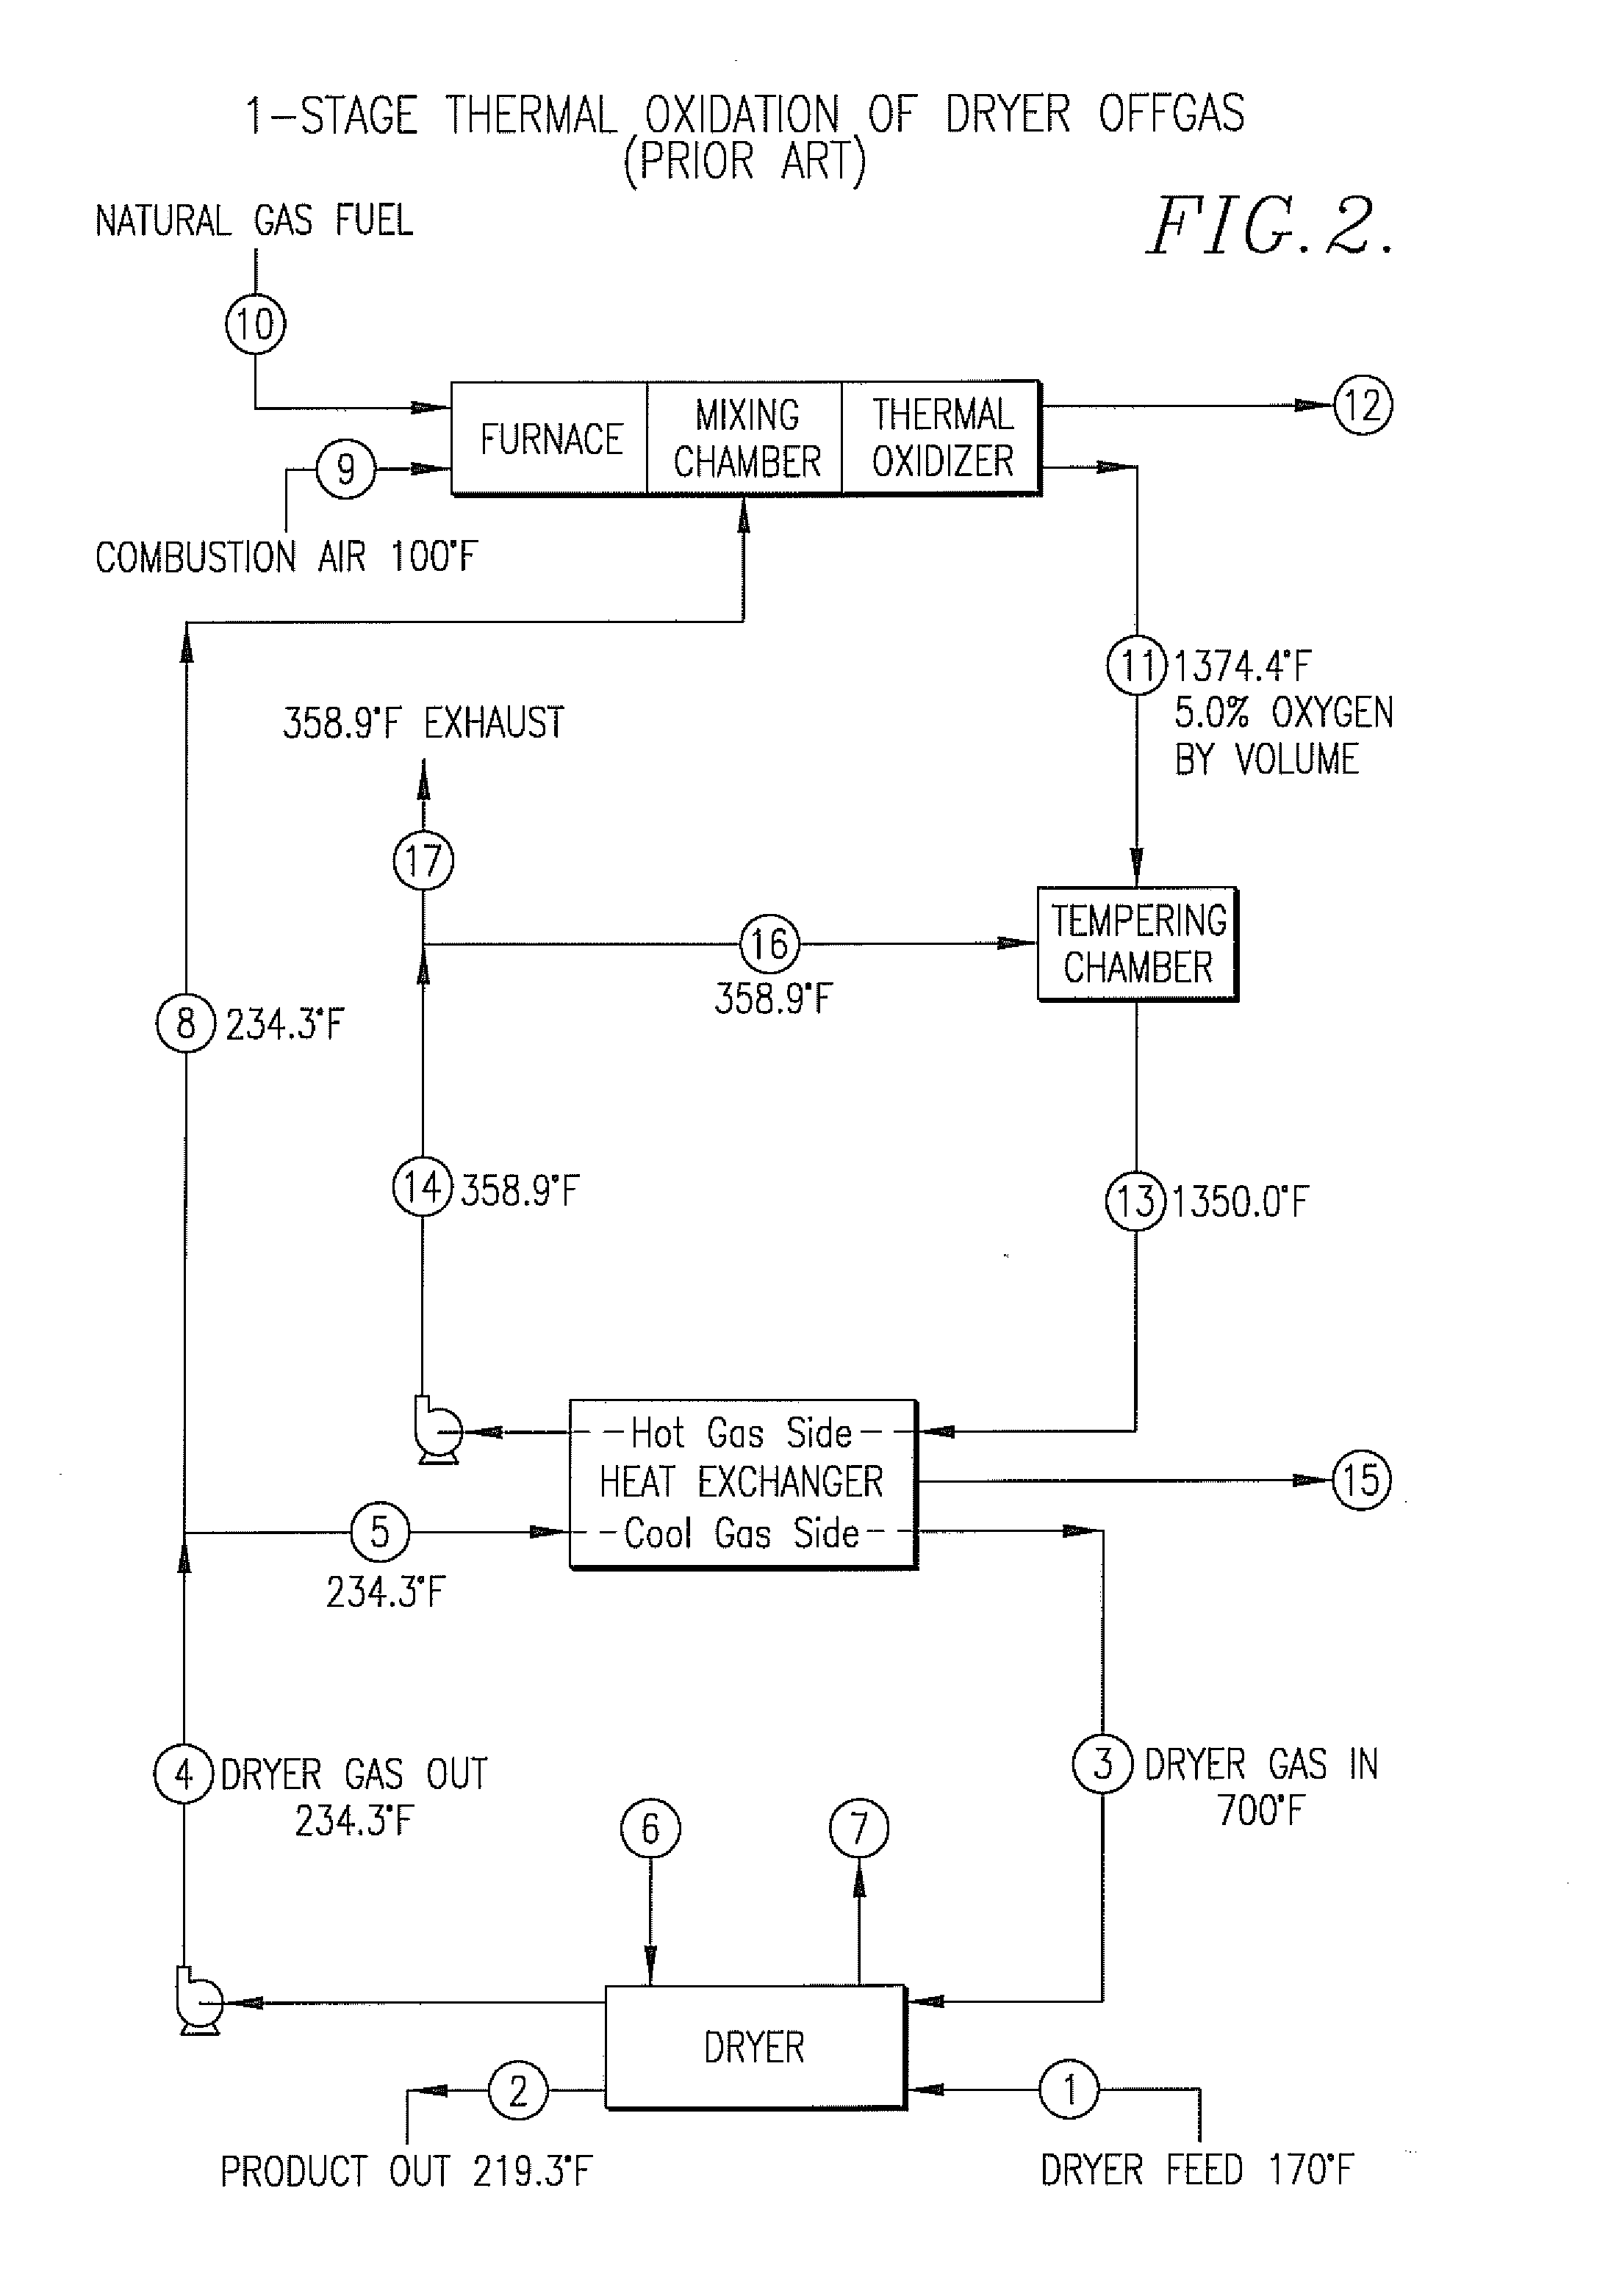 Two-stage thermal oxidation of dryer offgas